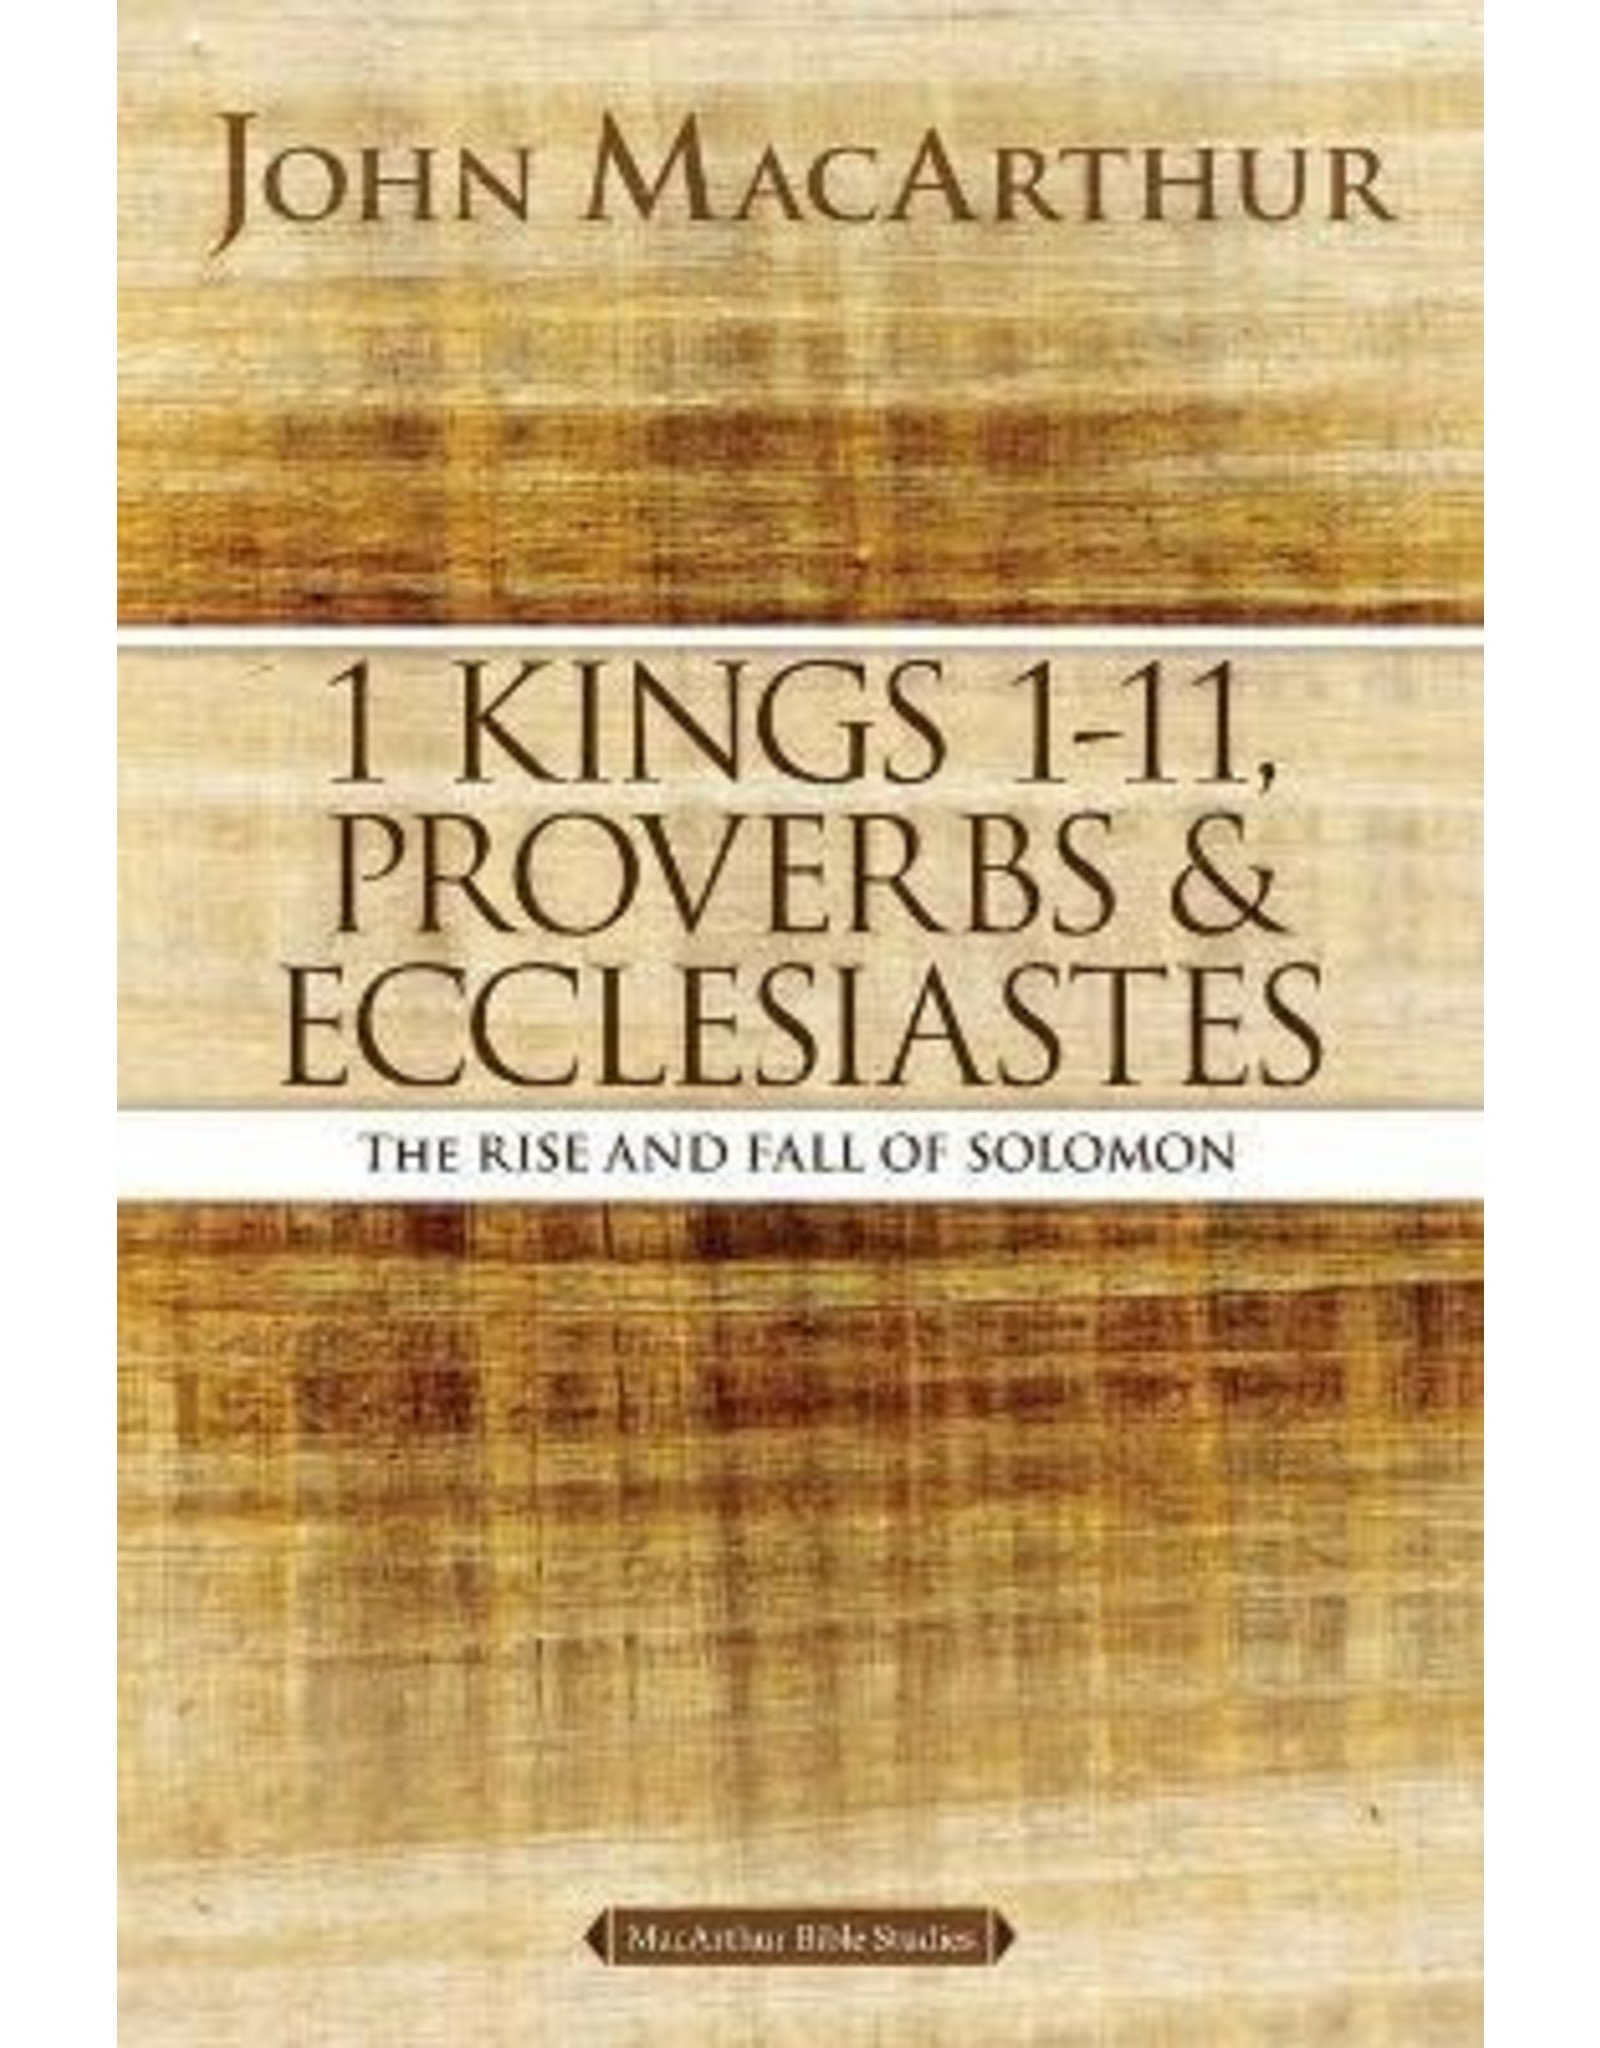 Harper Collins / Thomas Nelson / Zondervan MacArthur Bible Studies (MBS) - 1 Kings 1-11, Proverbs & Ecclesiastes: The Rise and Fall of Solomon